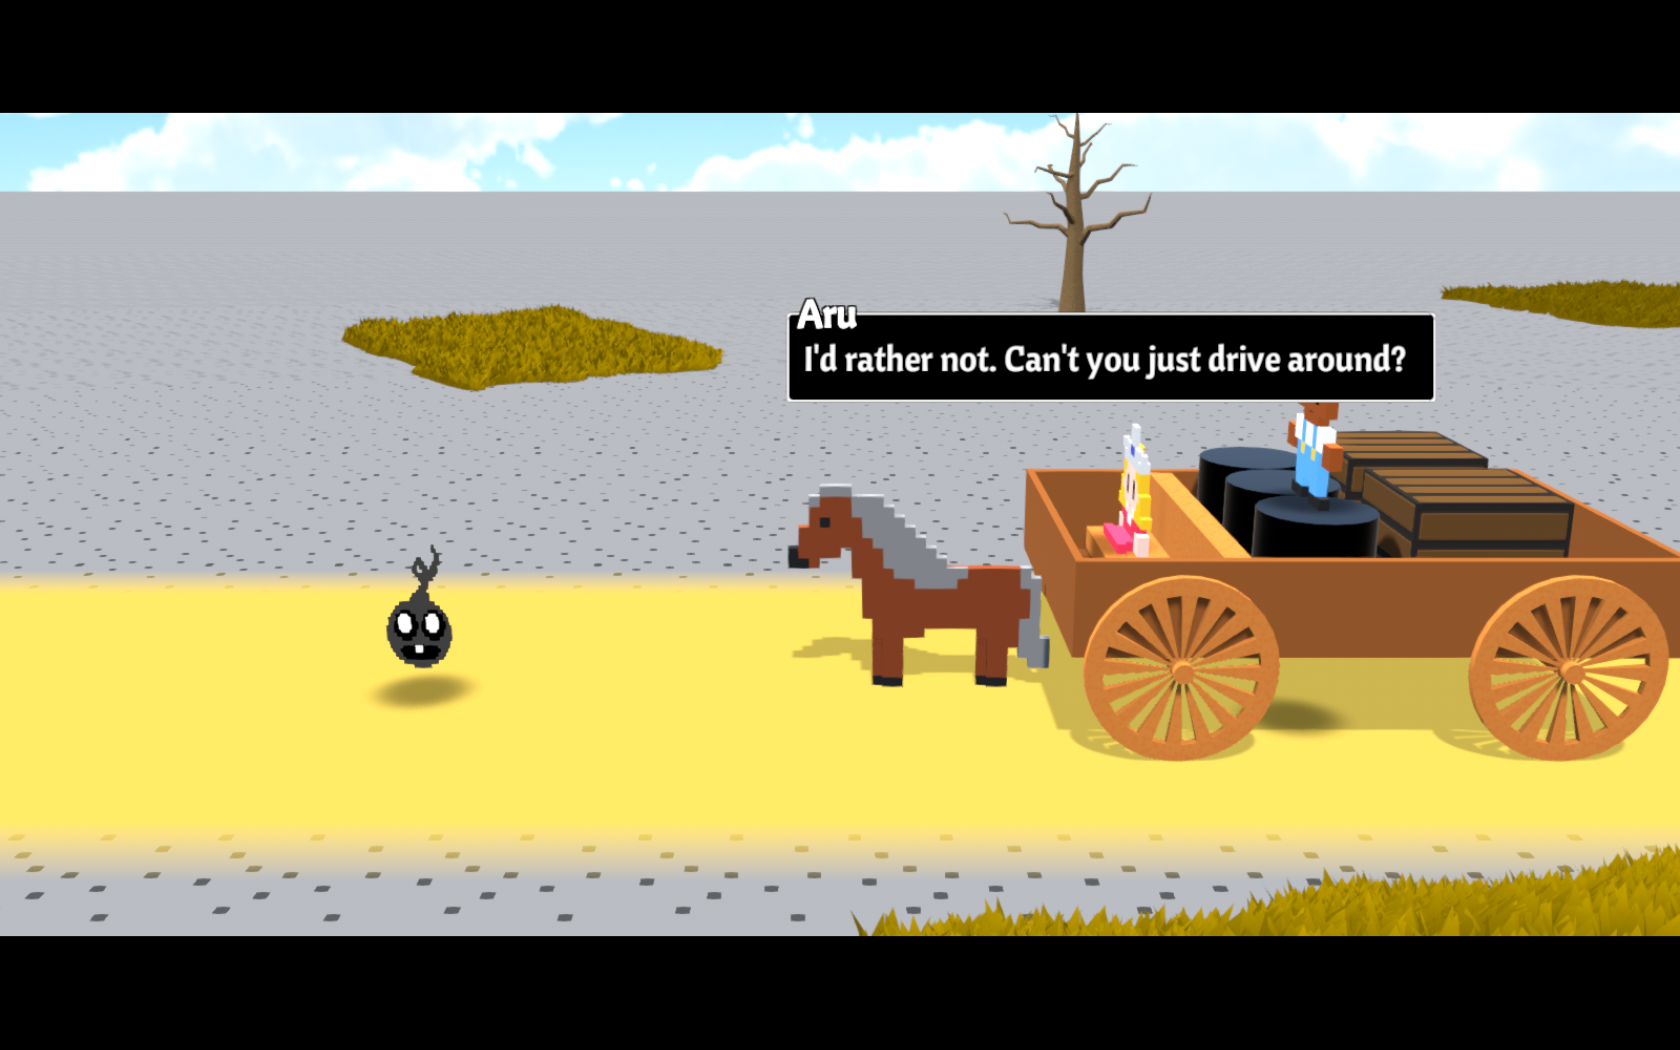 Screenshot from the game. Aru and Nate face a sprite in the road. Aru says, "I'd rather not. Can't you just drive around?"